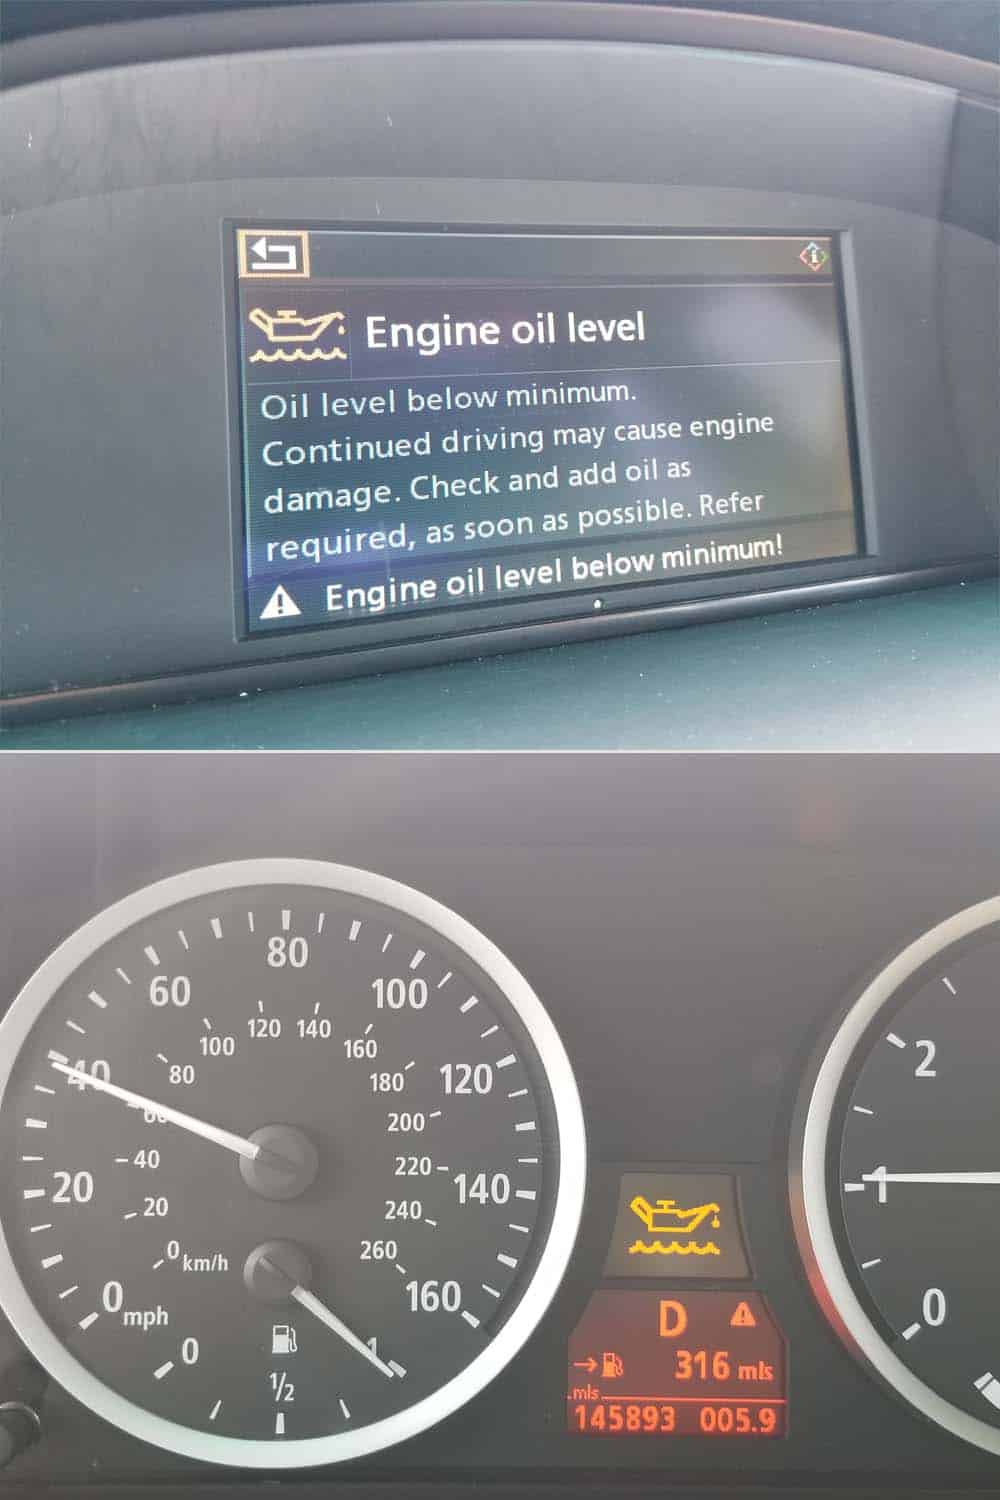 IDrive message and dashboard warning for low oil levels may be due to a faulty oil level sensor.